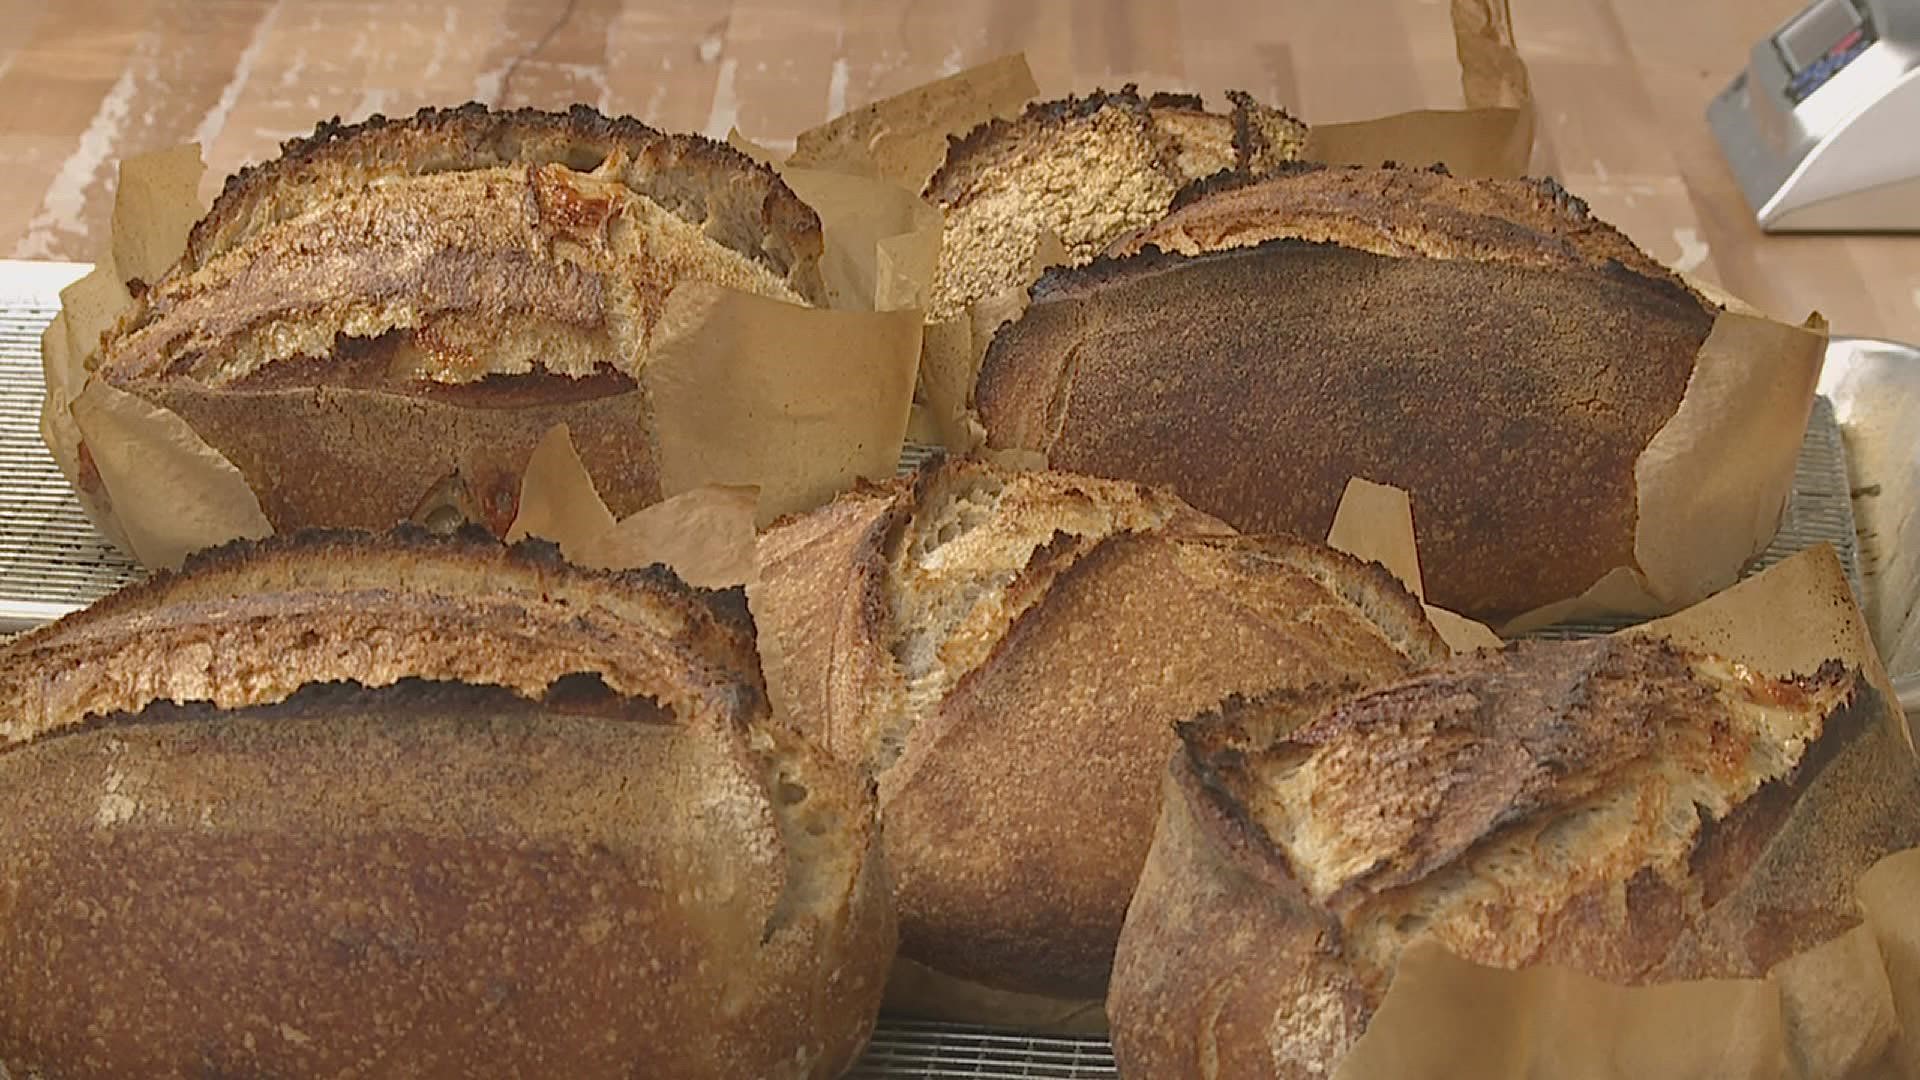 Brandon Carleton owns Blue Spruce Bakery and makes 12 different types of rustic, European-style bread.